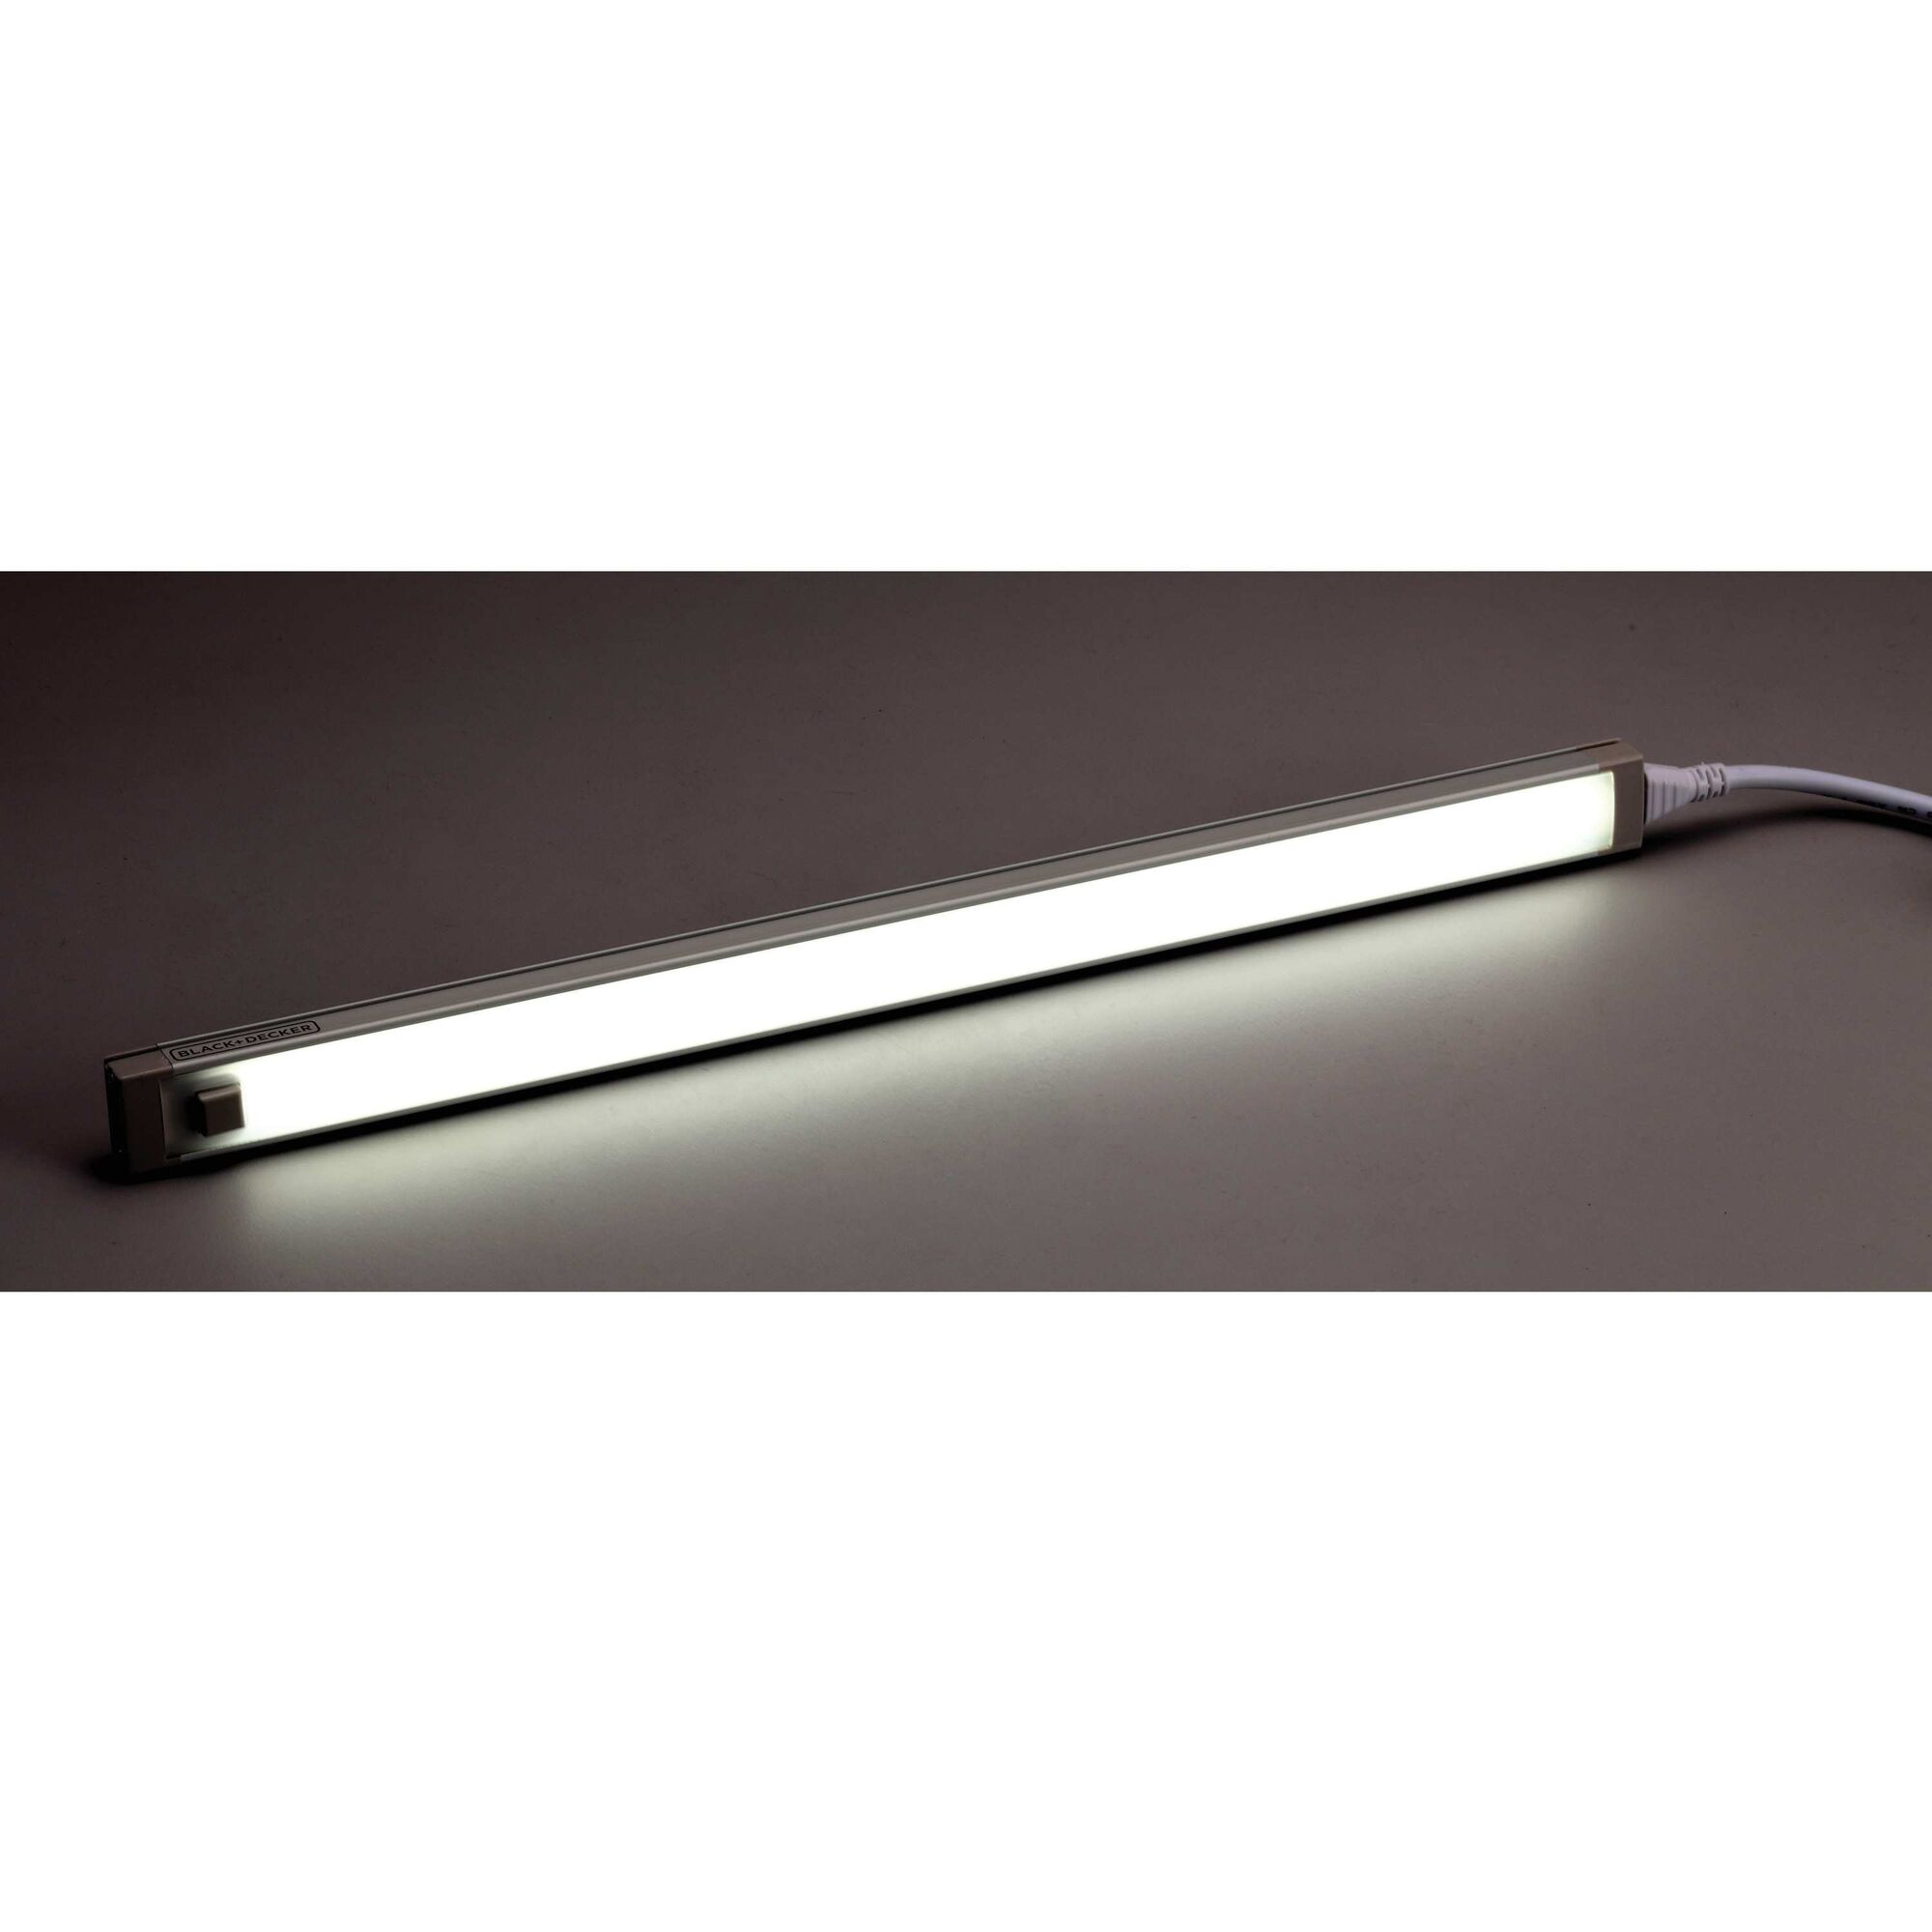 1 BAR LED UNDER CABINET LIGHTING KIT in COOL WHITE with ultra slim design feature.